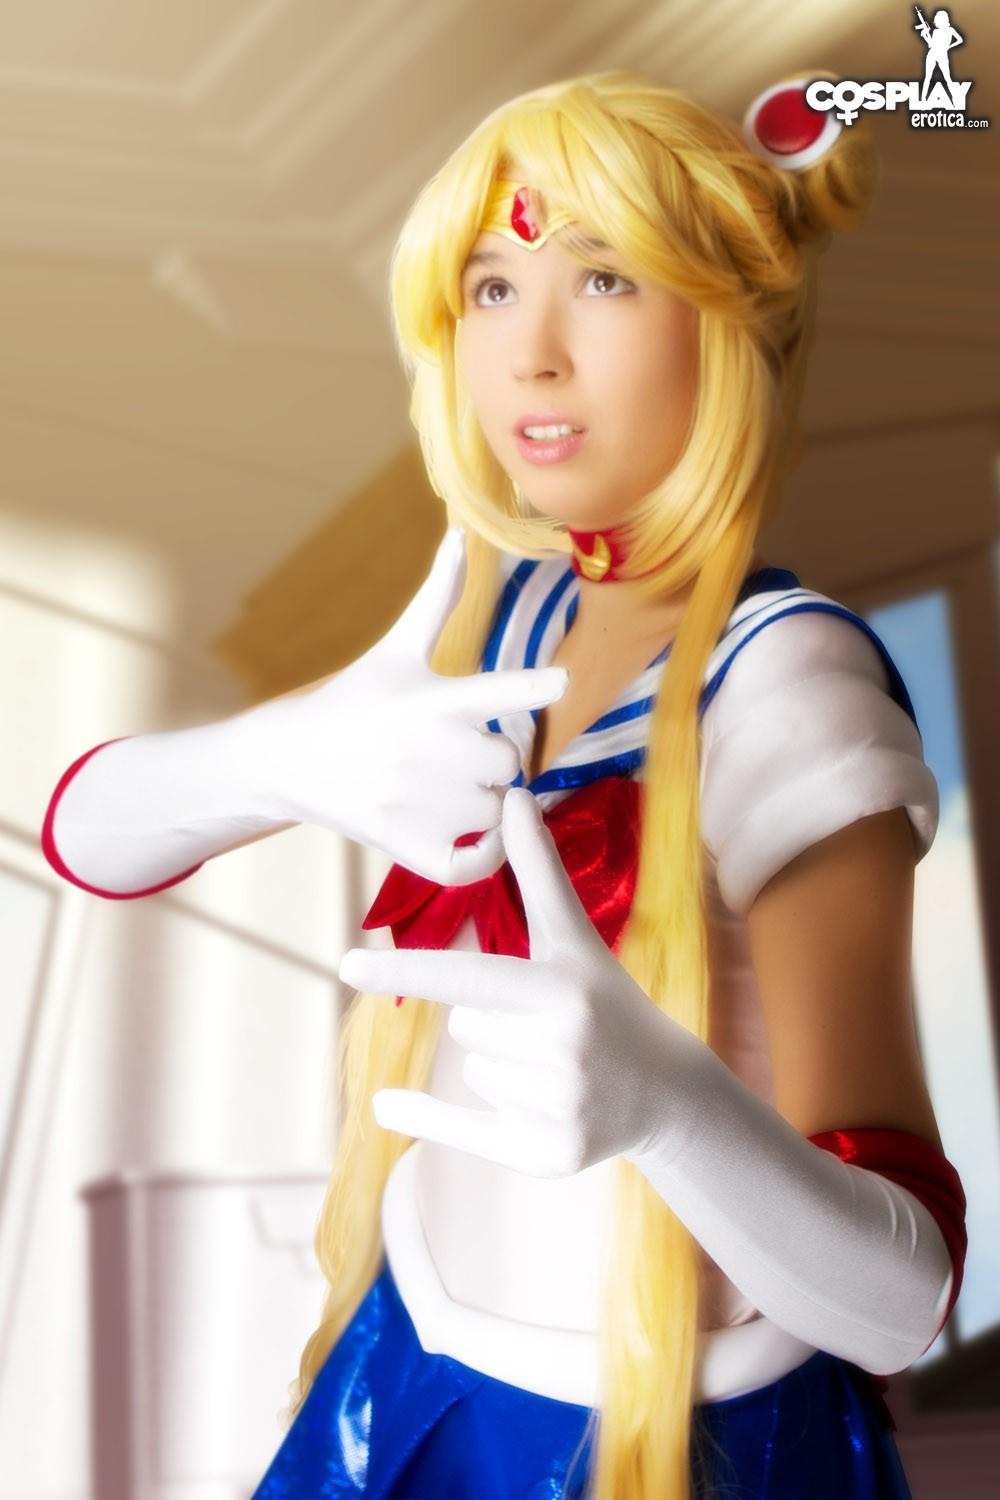 Cosplay girl Stacy is fighting evil by moonlight #60007705